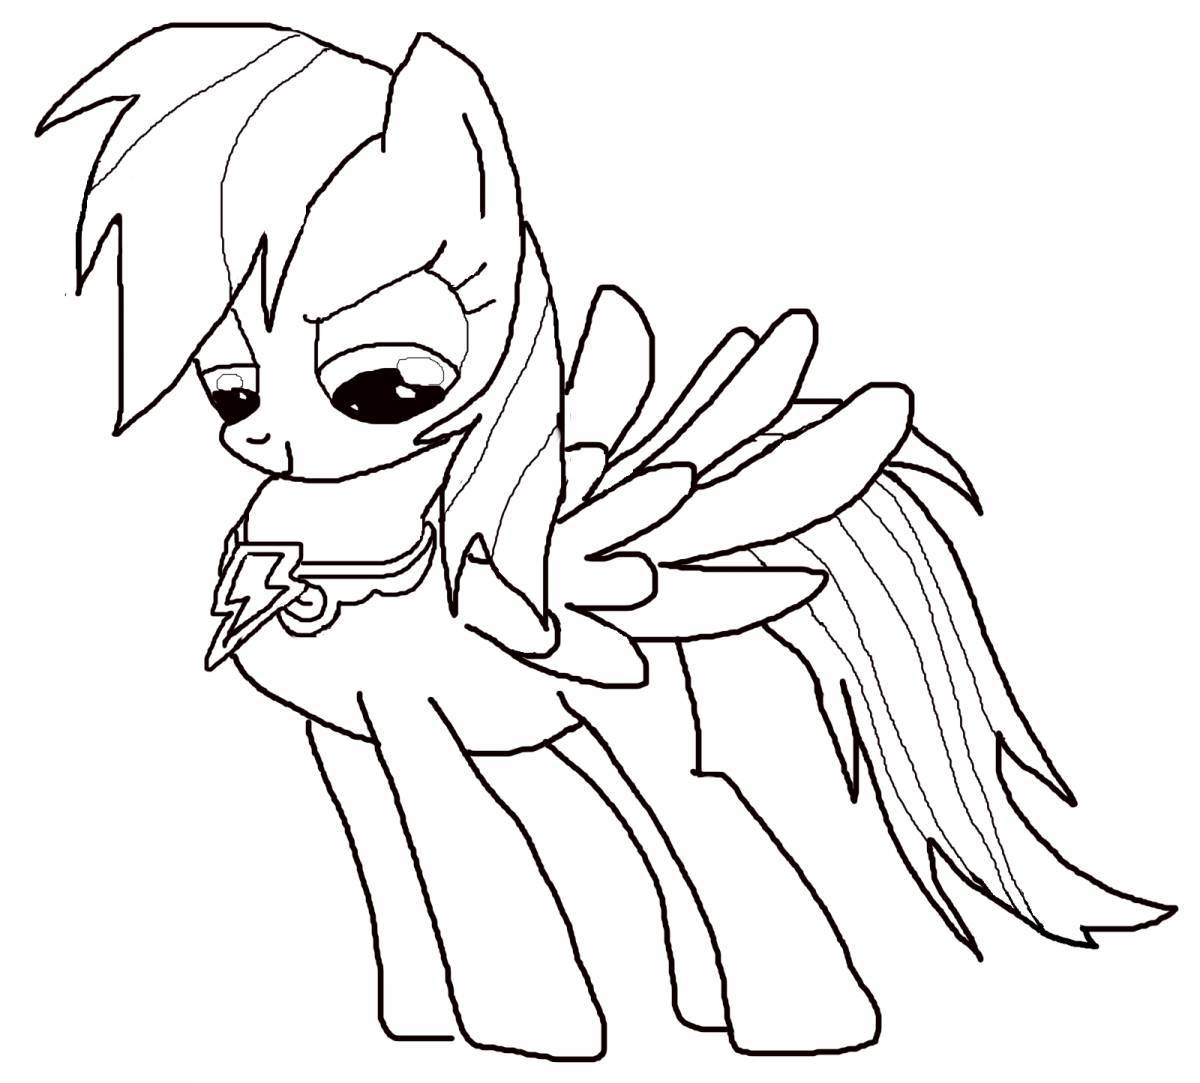 Intricate pony coloring page